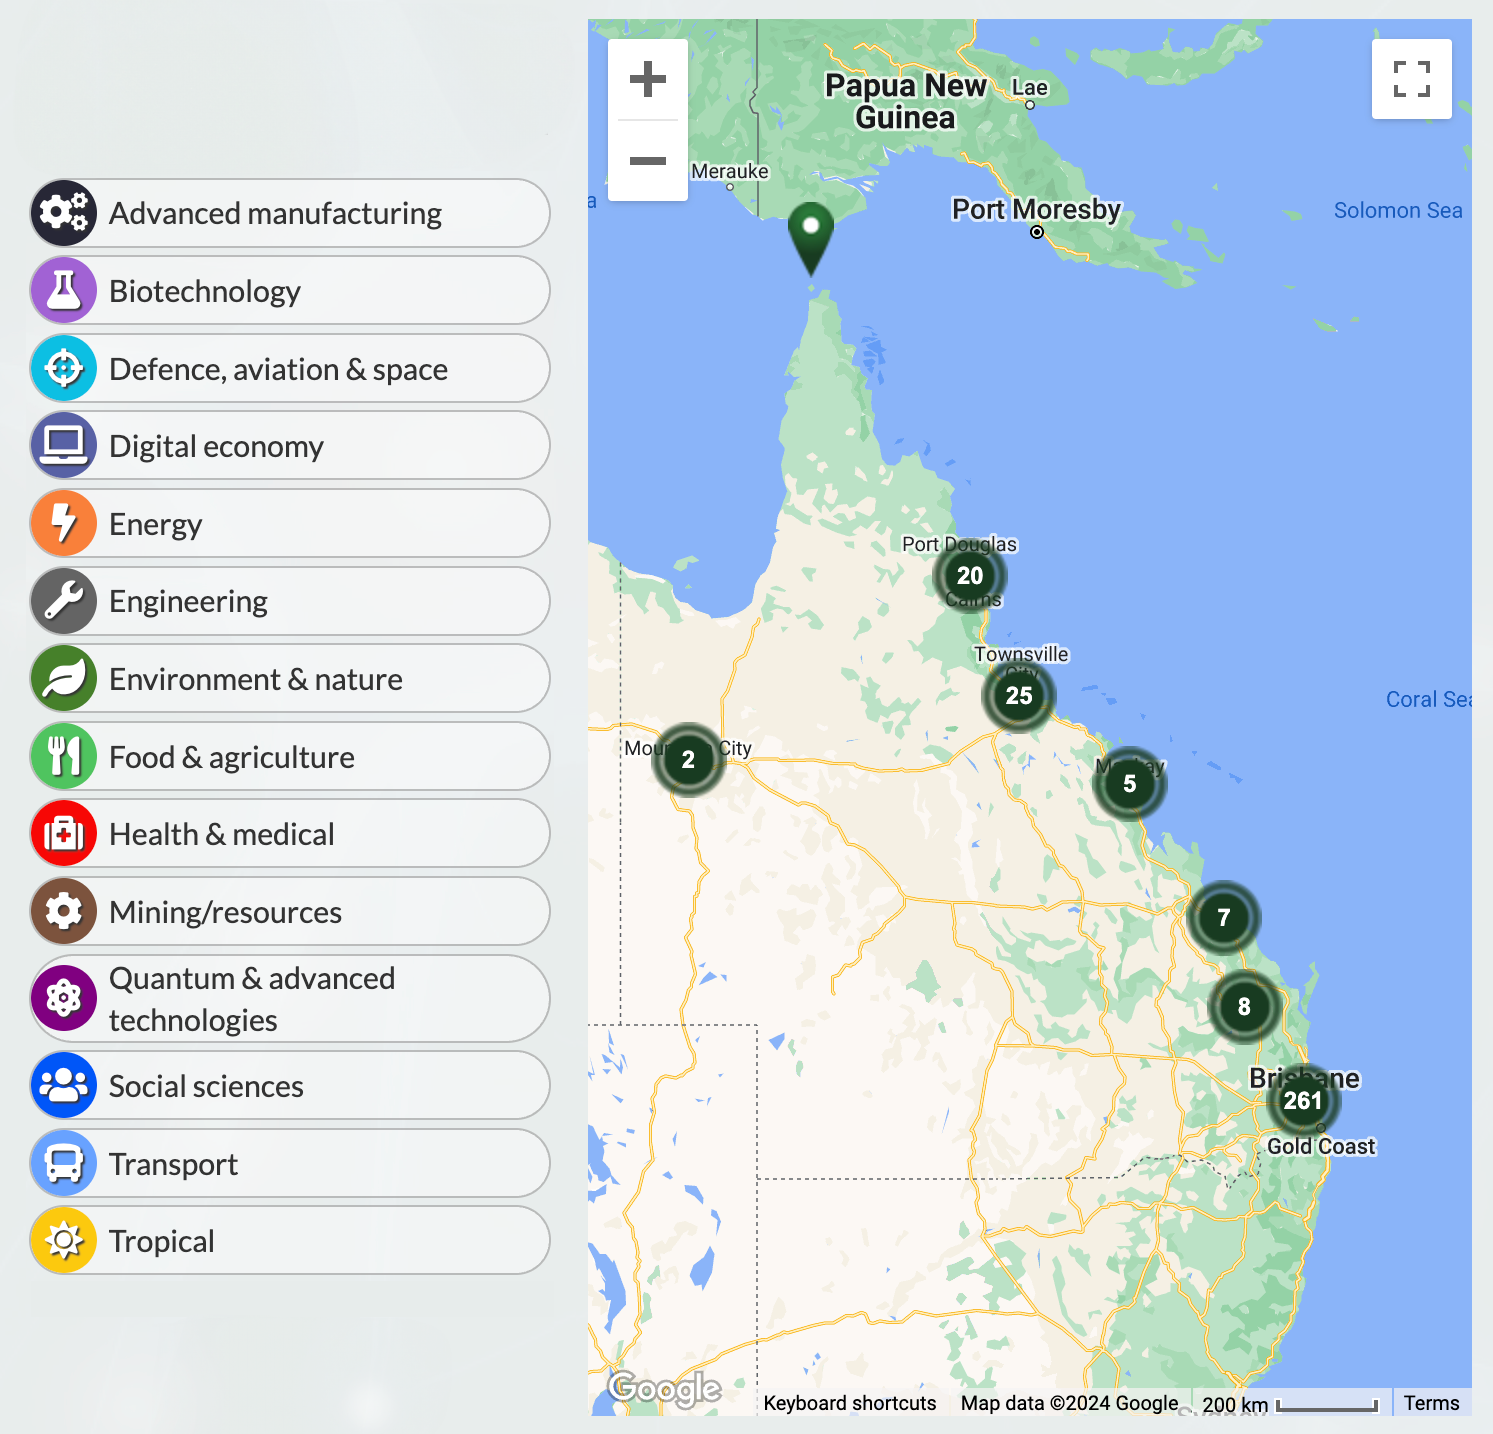 Queensland Science Capability Directory